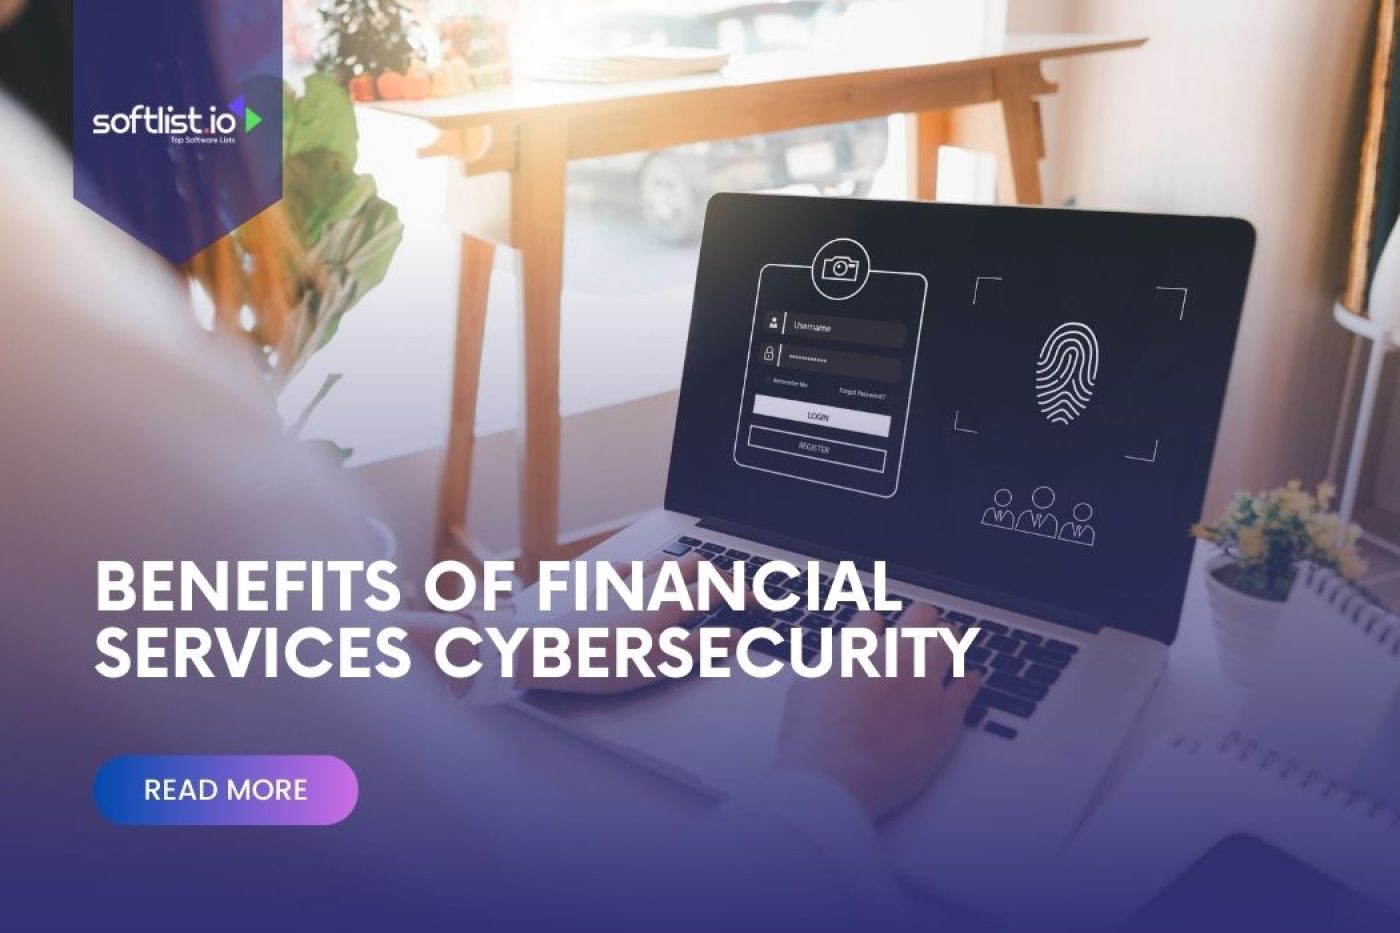 Benefits of Financial Services Cybersecurity